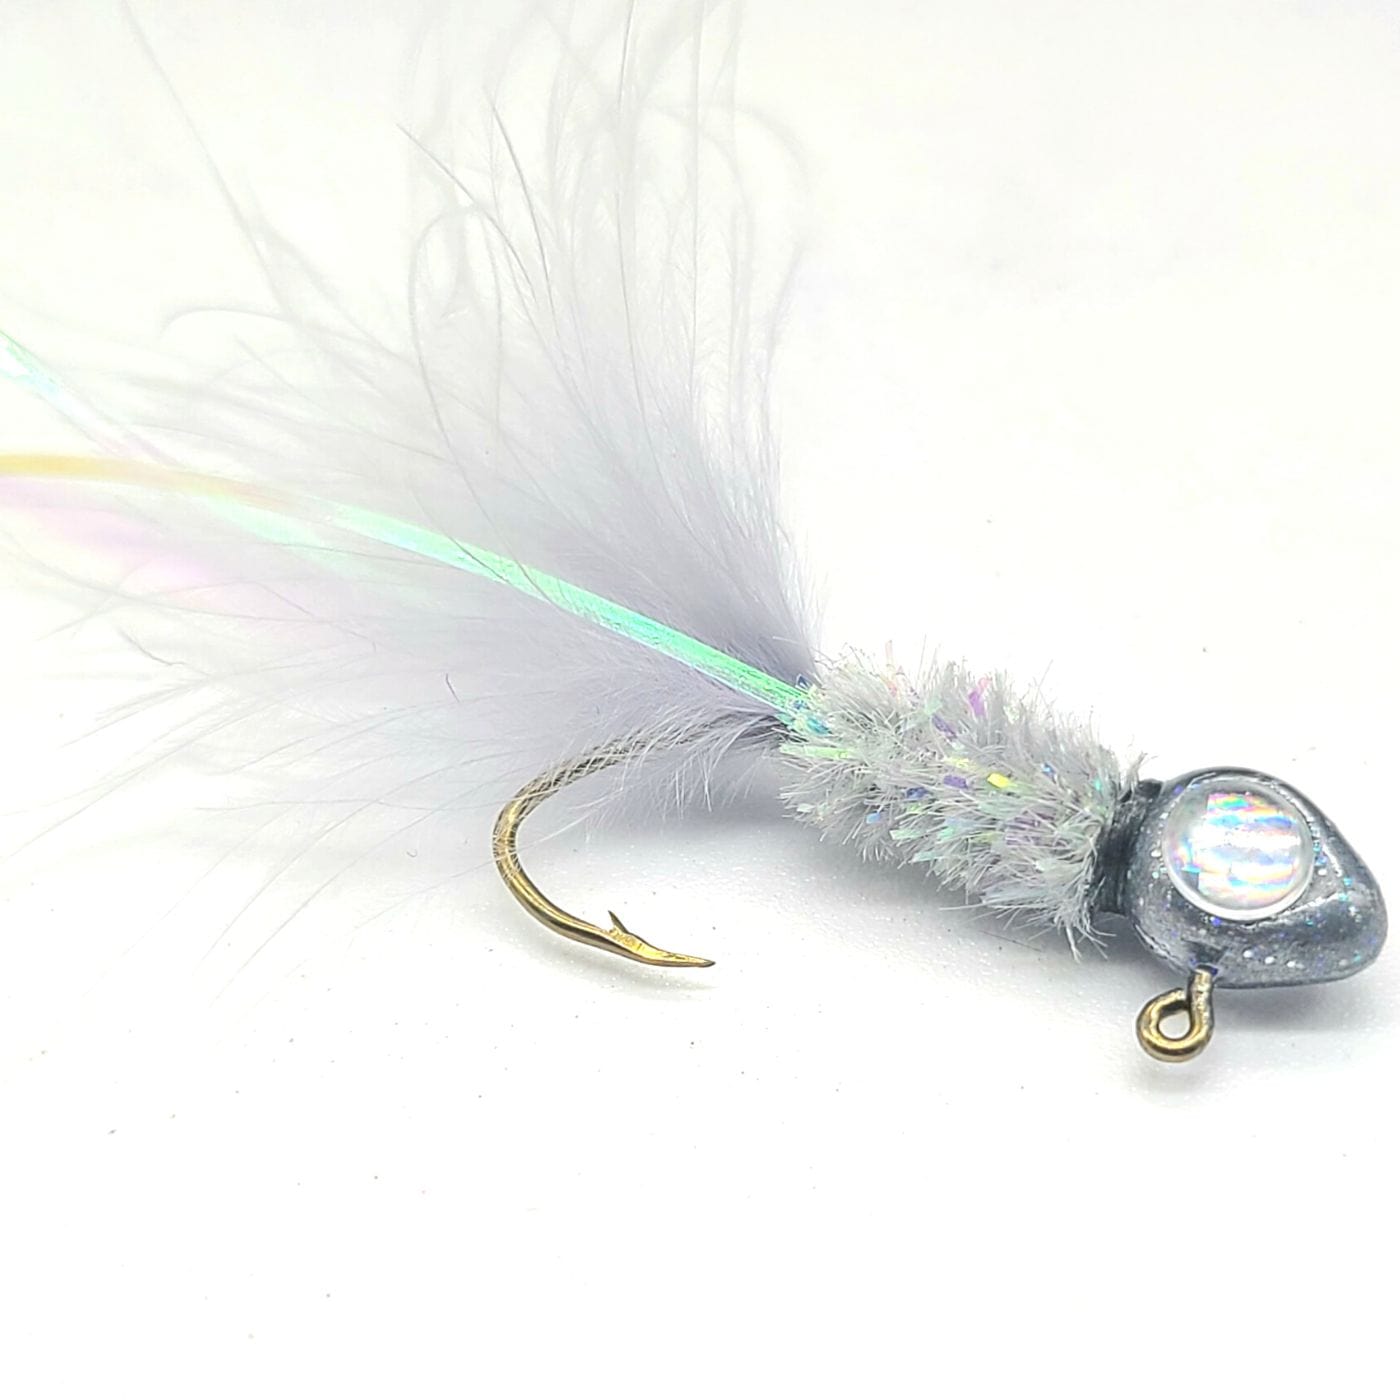 Hand tied Crappie jig featuring a custom Ghost gray minnow head, irrodescent  3D eyes, Grey Ghost body chenille, Gray marabou tail, and pearl flash. Hand tied onto a #4 Mustad sickle hook by Ramble Tamble Tackle.